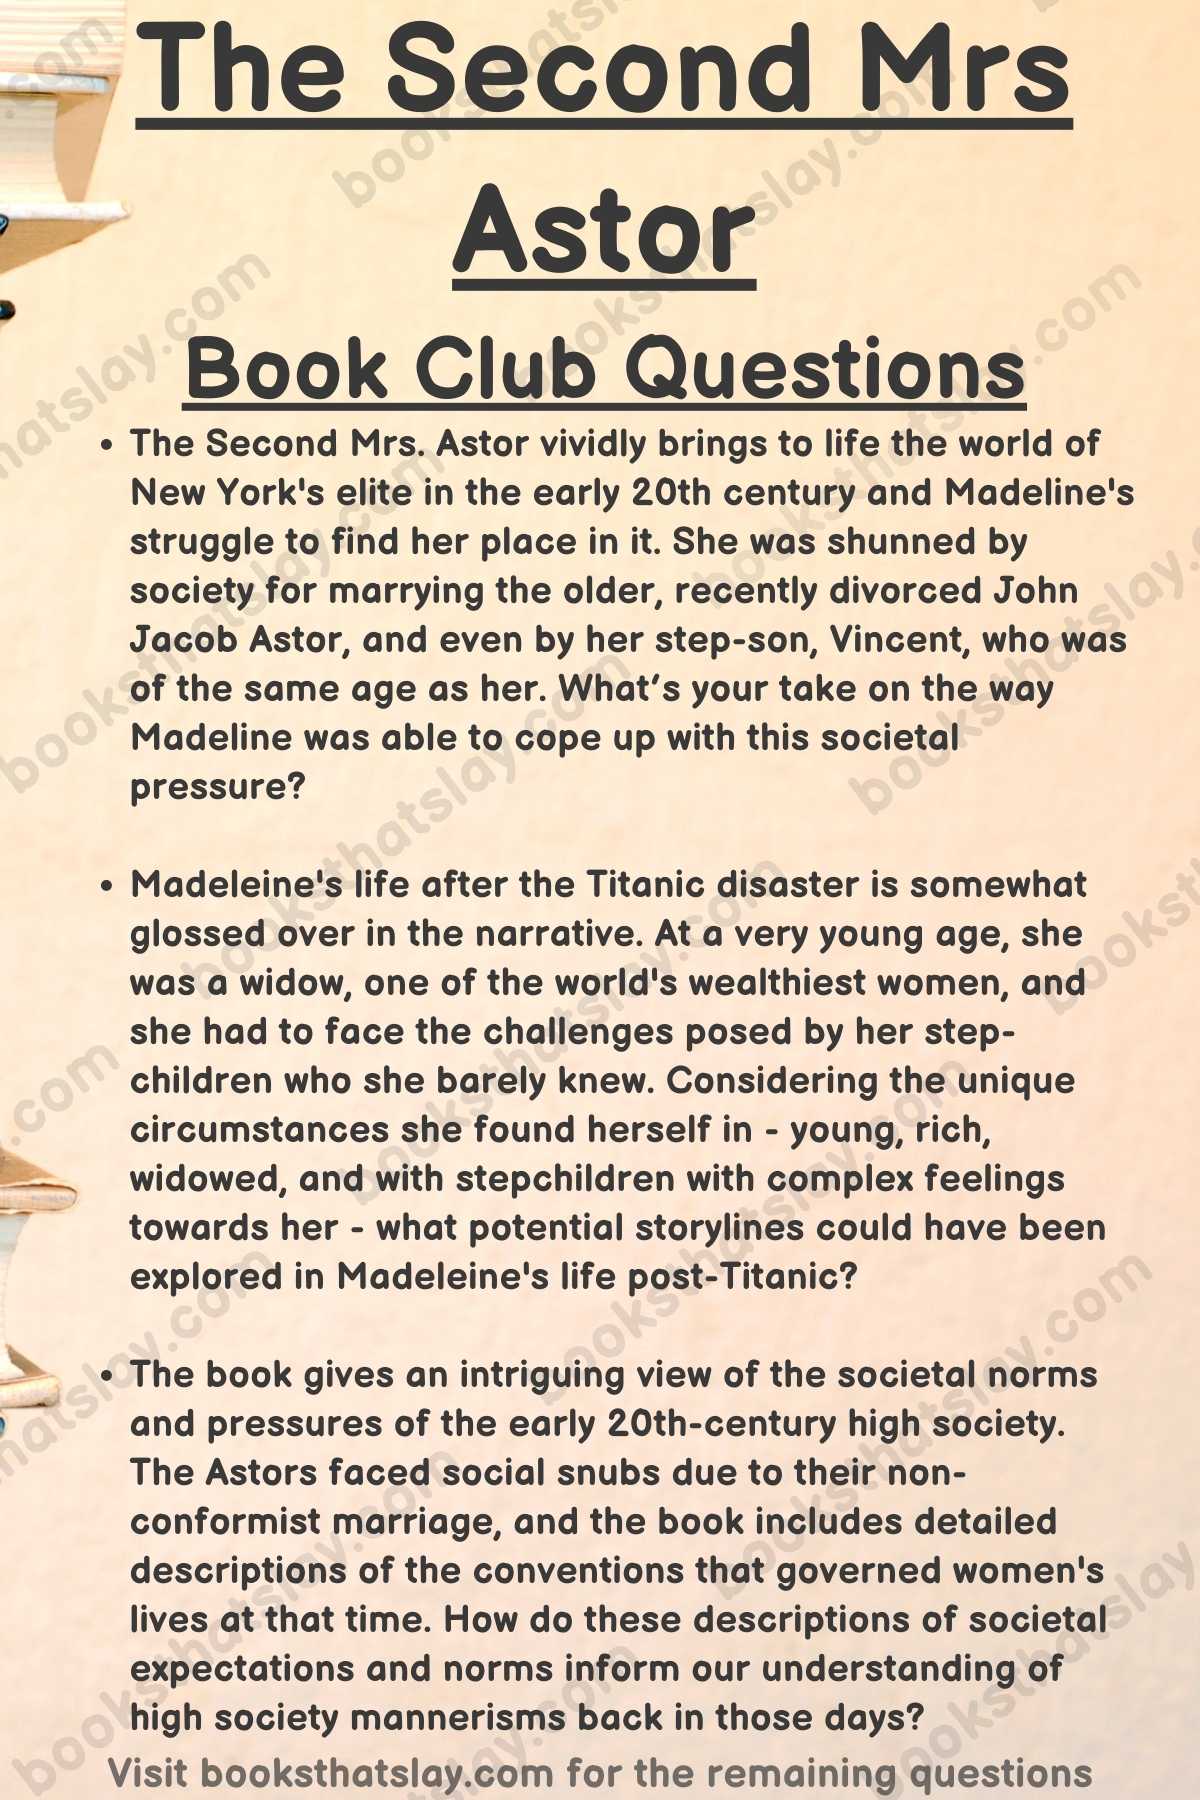 The Second Mrs Astor Book Club Questions for Discussion